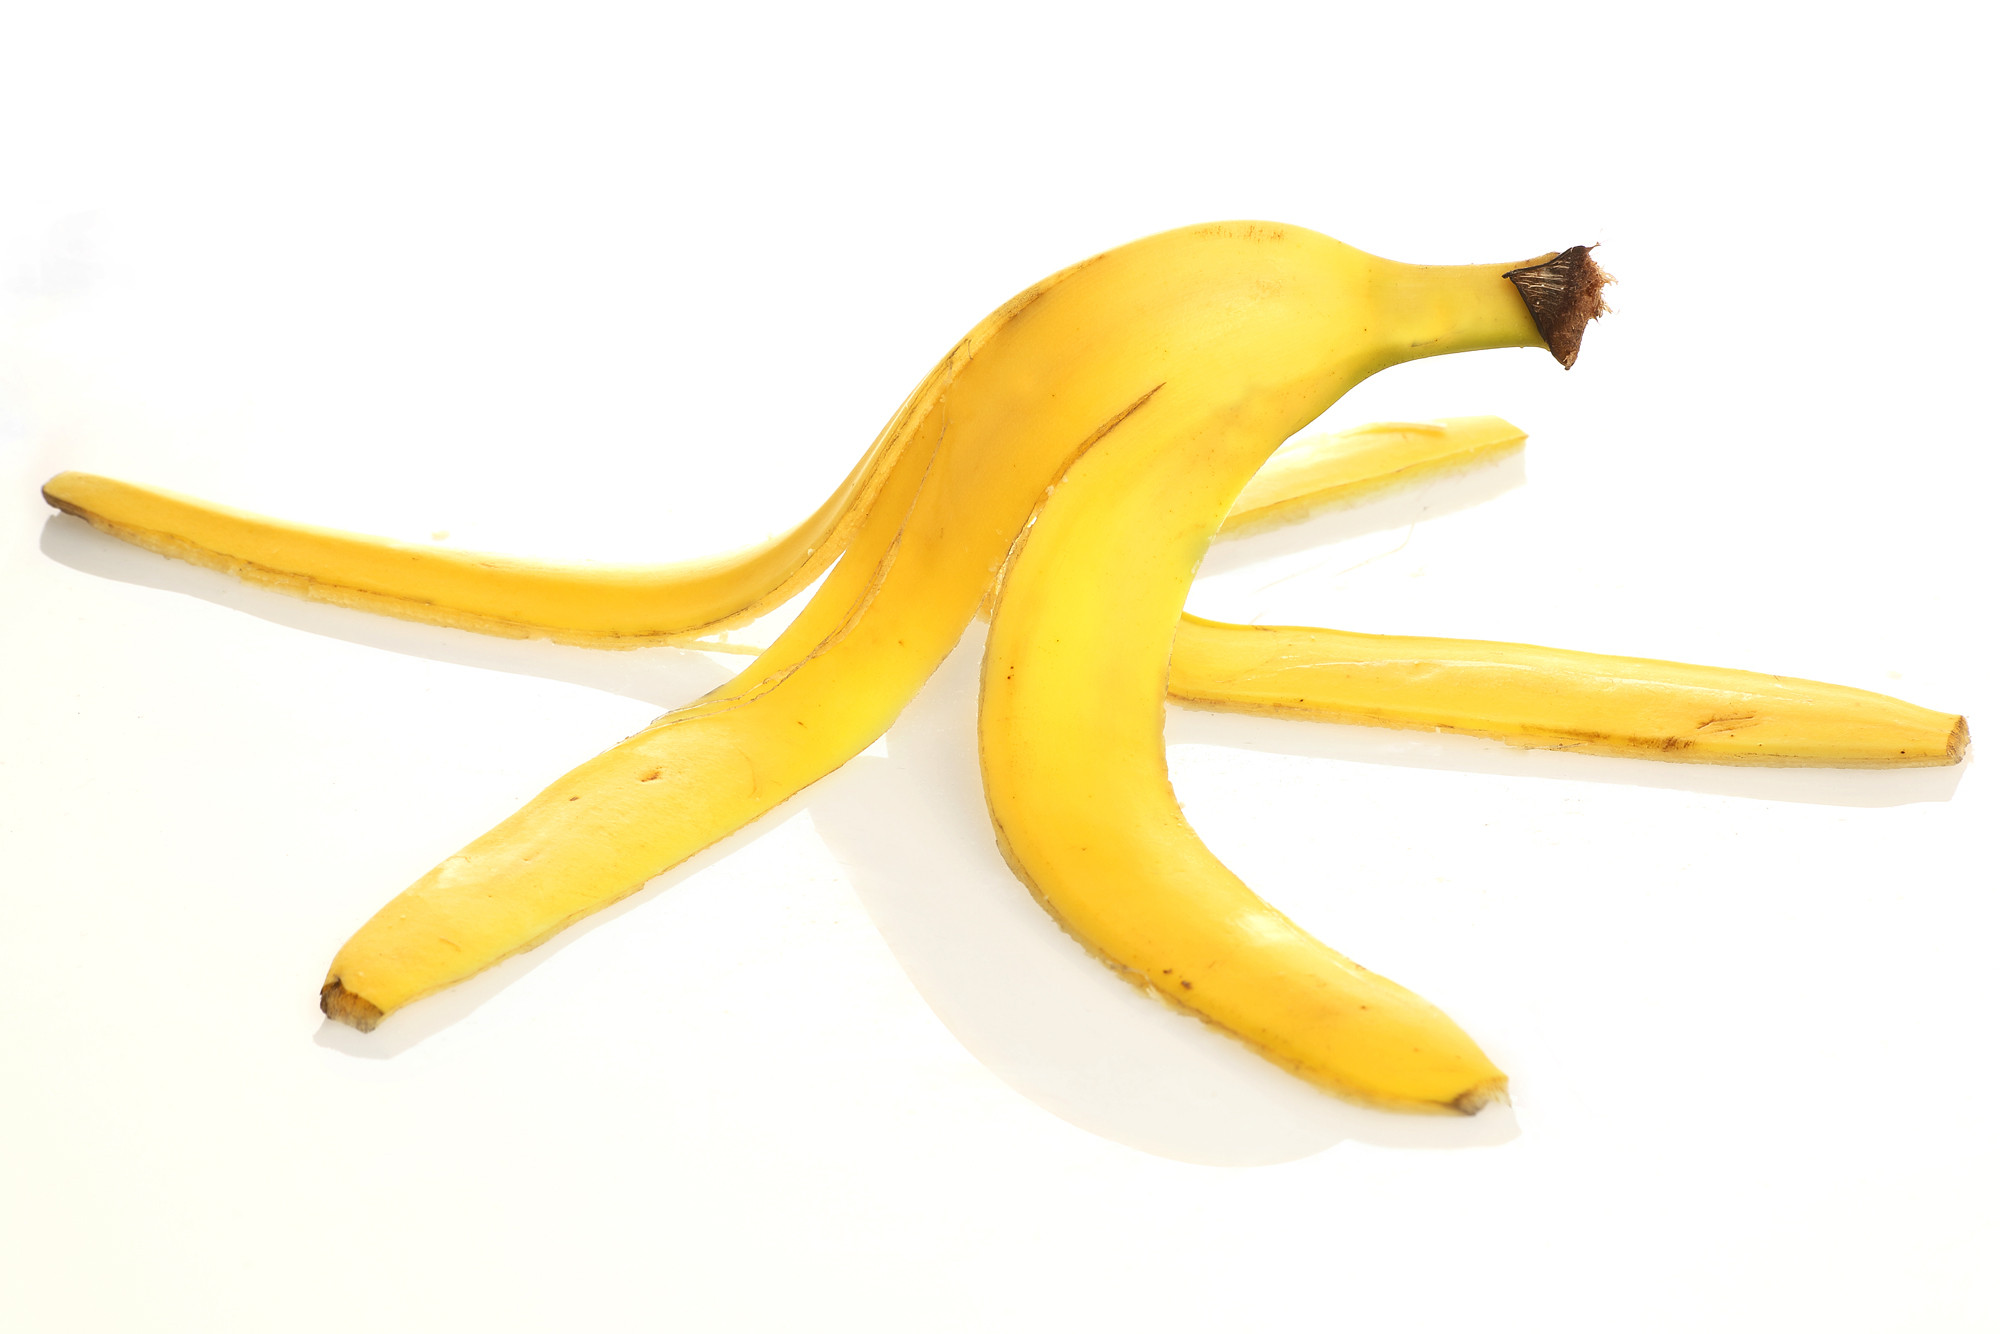 Banana peels are your new weight-loss weapon, seriously